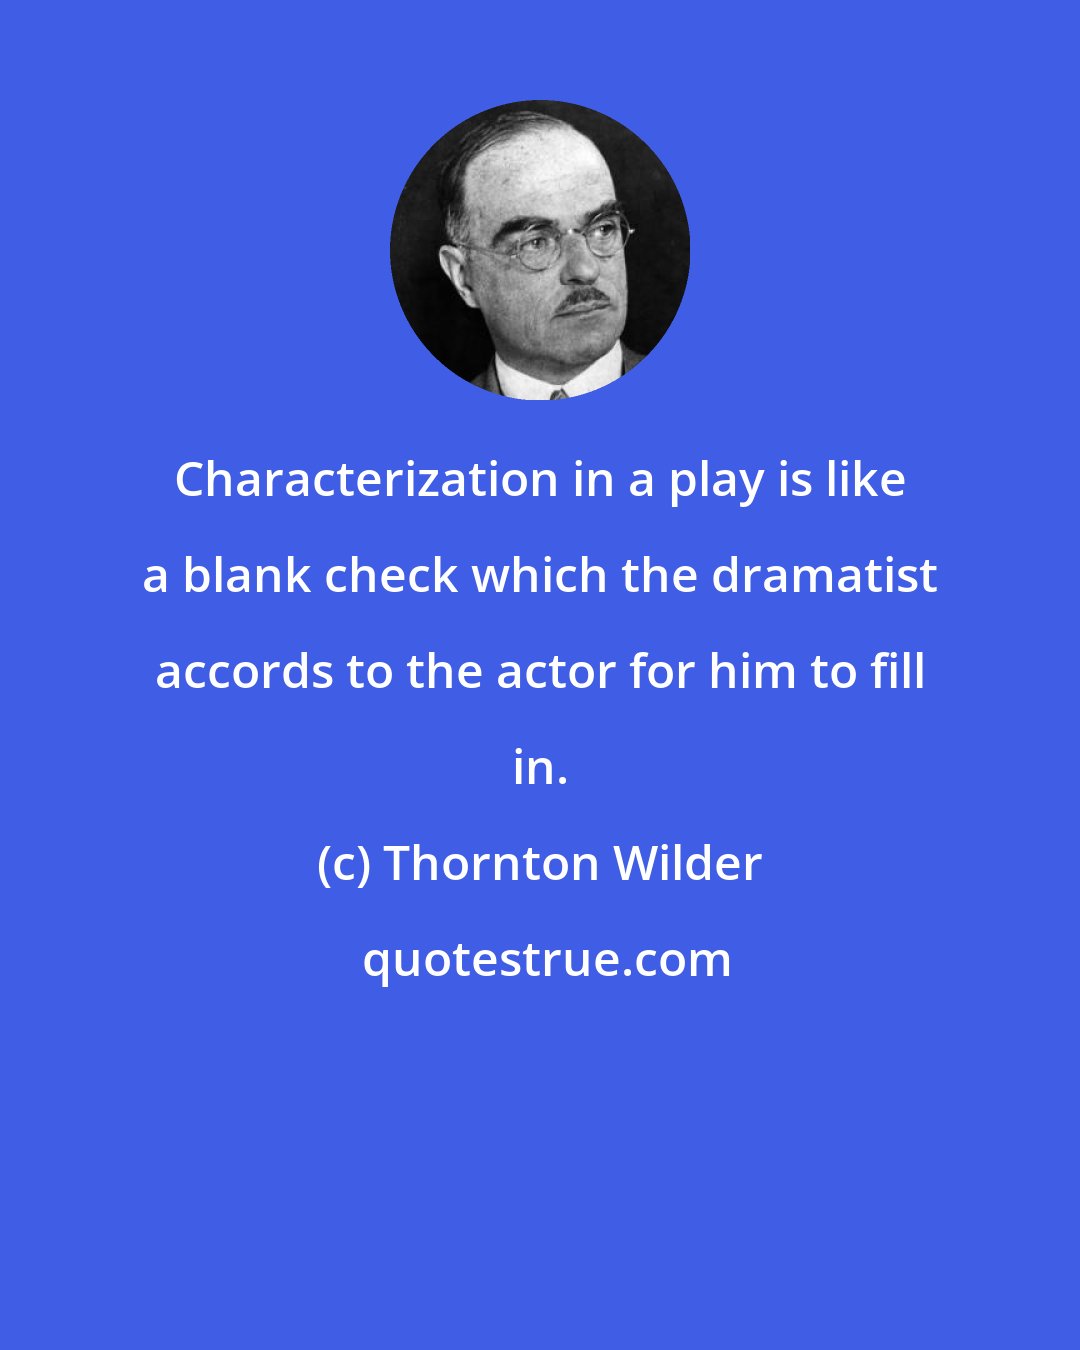 Thornton Wilder: Characterization in a play is like a blank check which the dramatist accords to the actor for him to fill in.